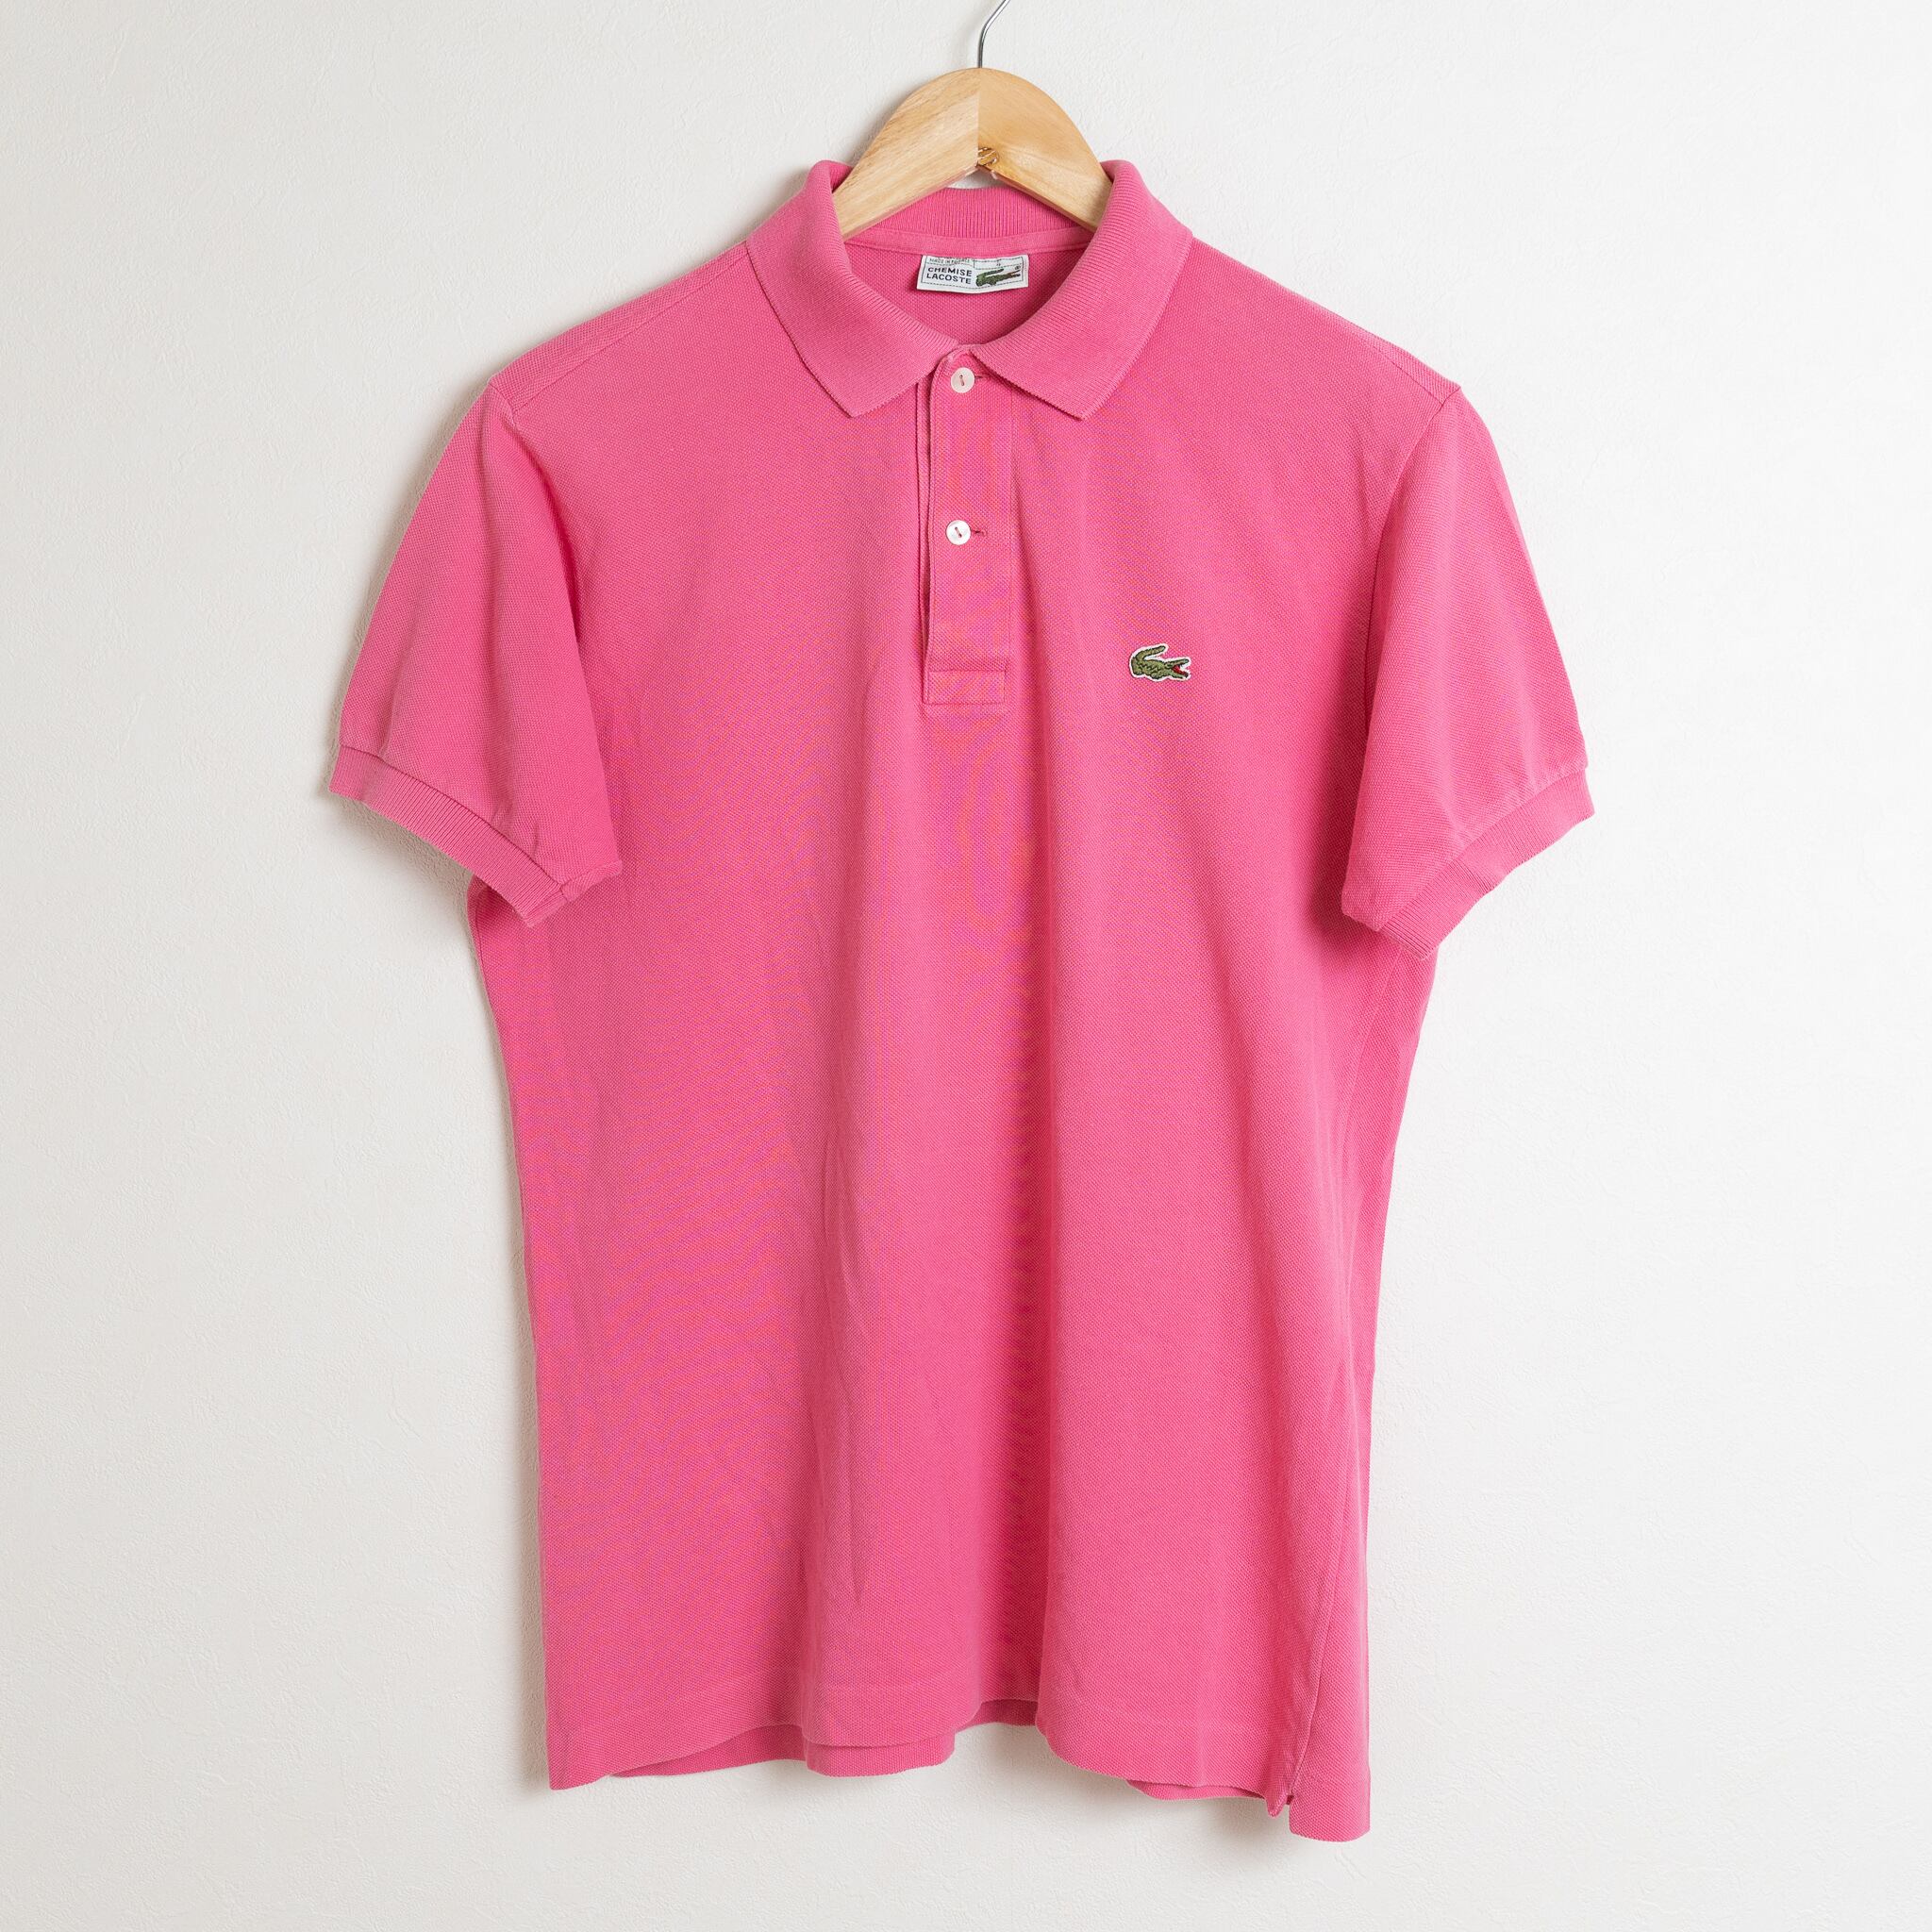 1970s-80s】CHEMISE LACOSTE Polo Shirts Made in France フレンチ 